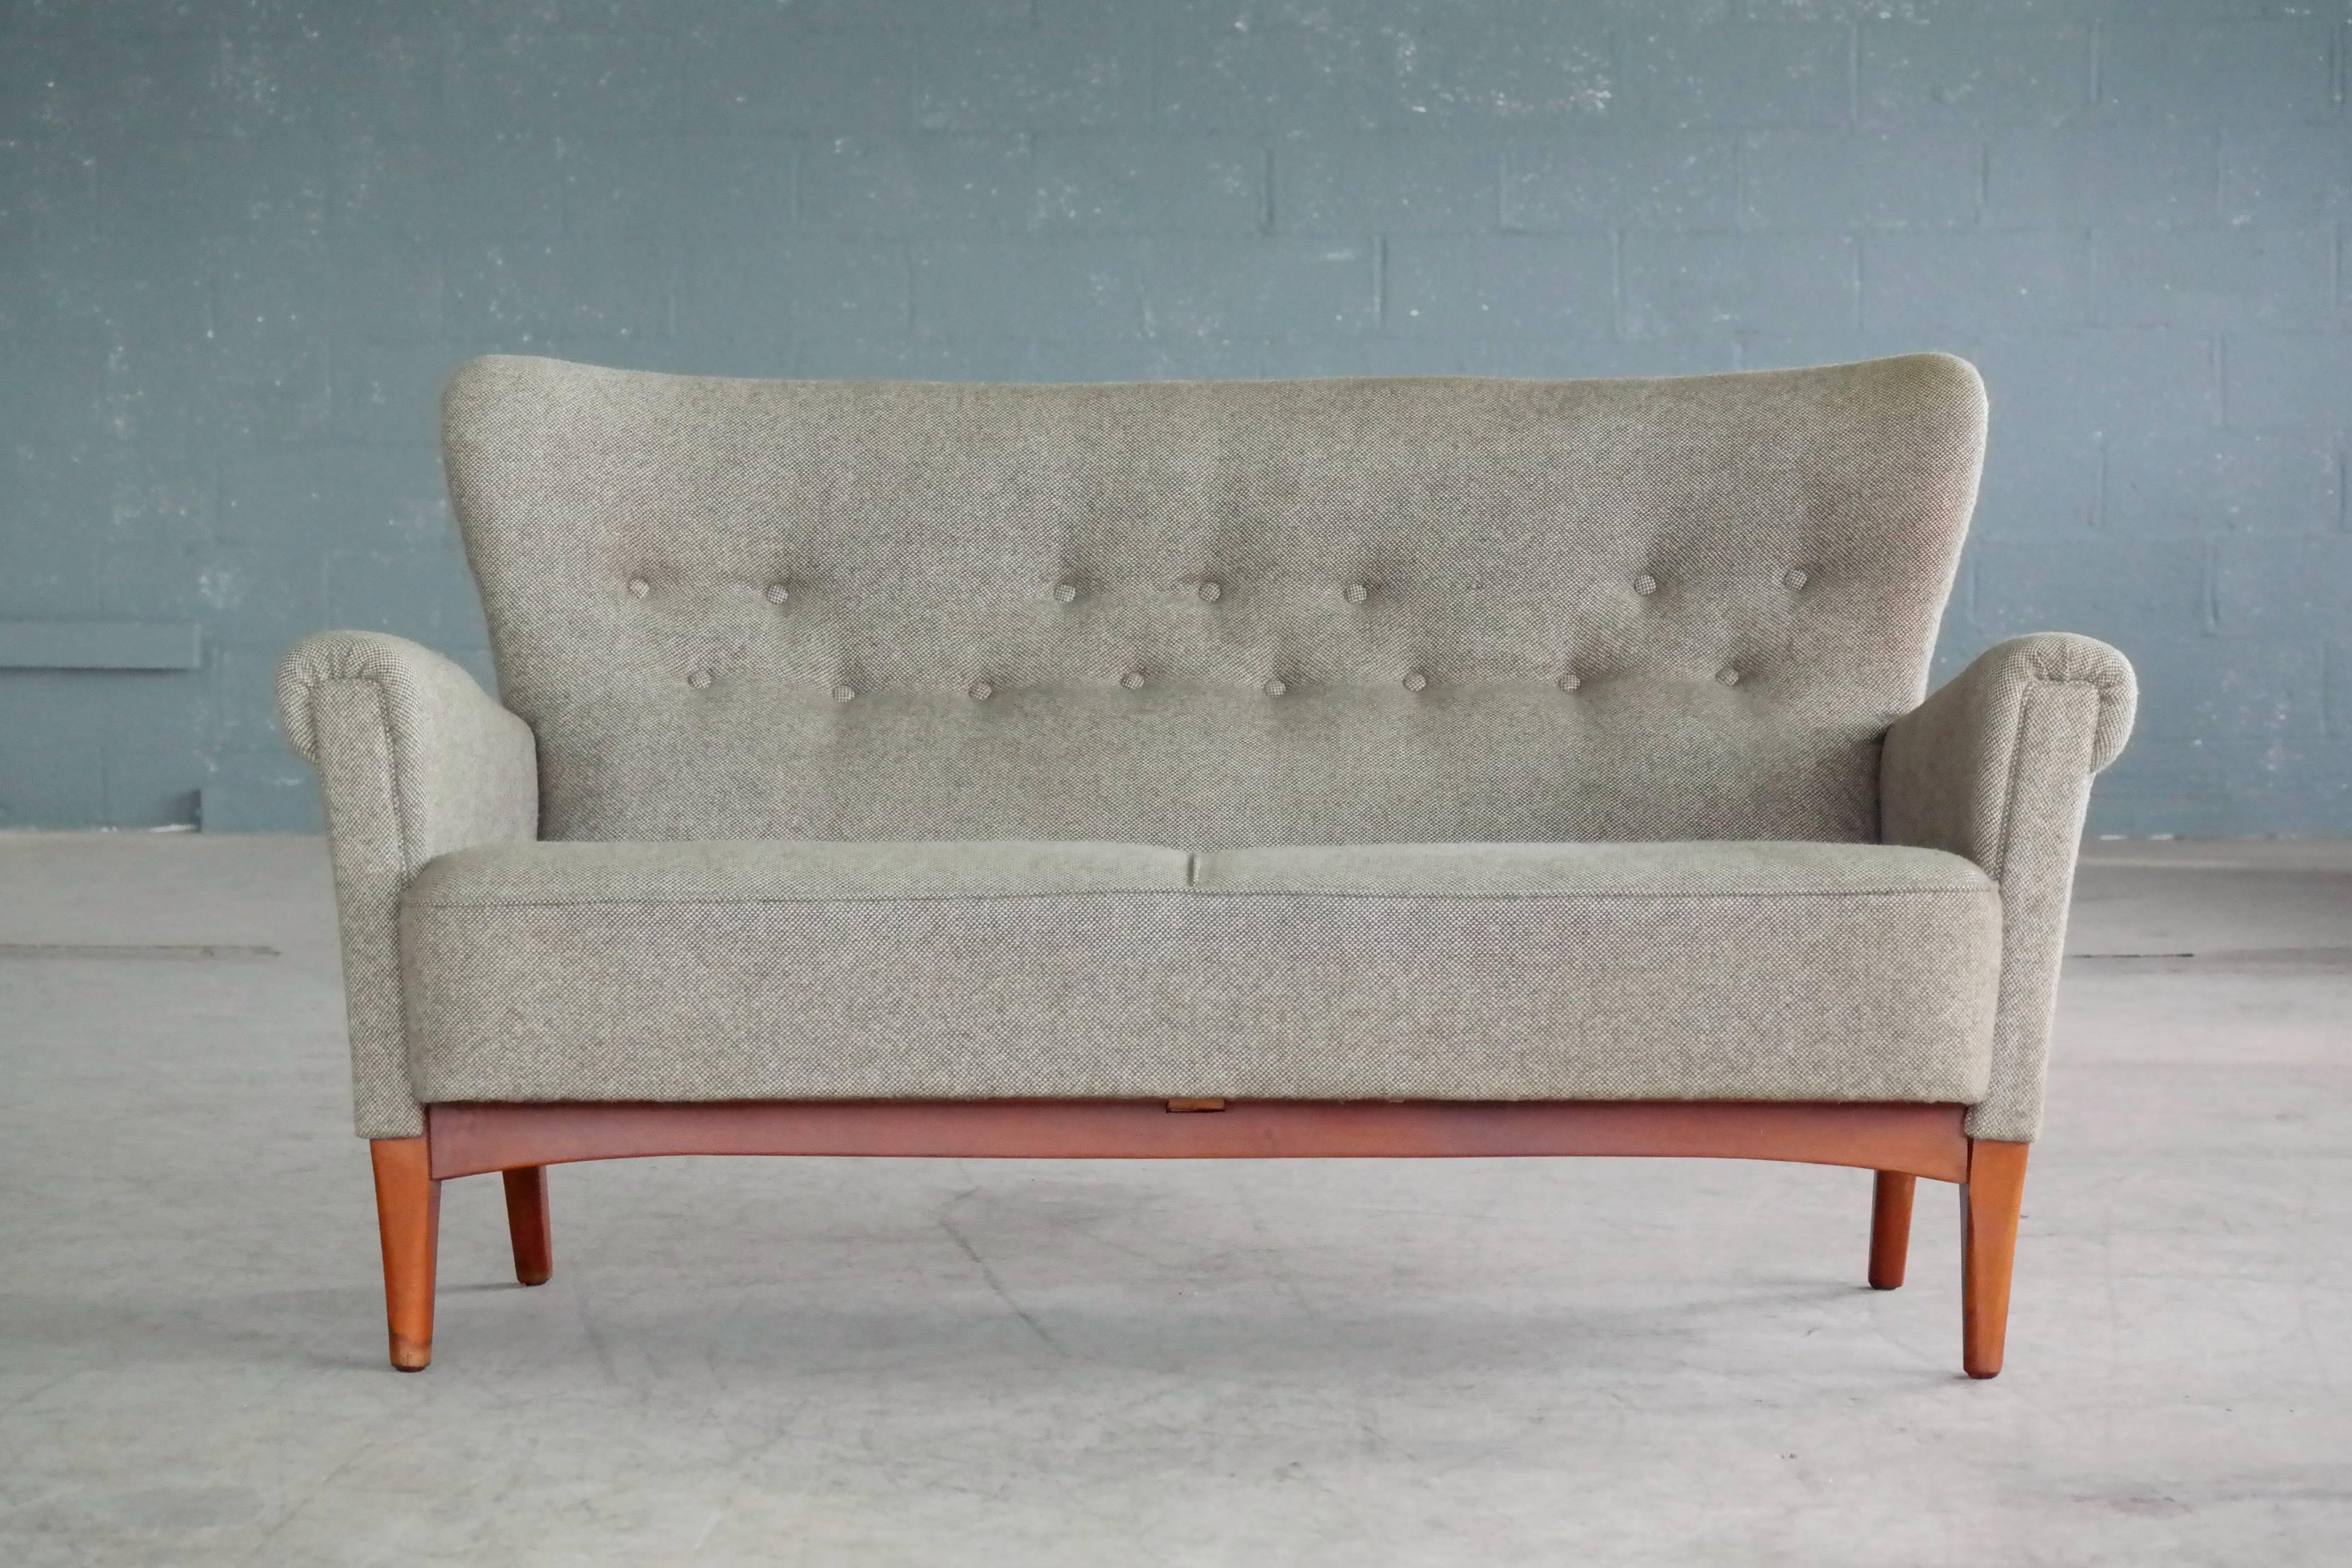 Very elegant settee or two-seat sofa made by Fritz Hansen sometime in the early to mid-1950s in Copenhagen, Denmark. The frame is construed similar to Fritz Hansen's armchairs of the 1940s allowing it to be disassembled without use of tools.